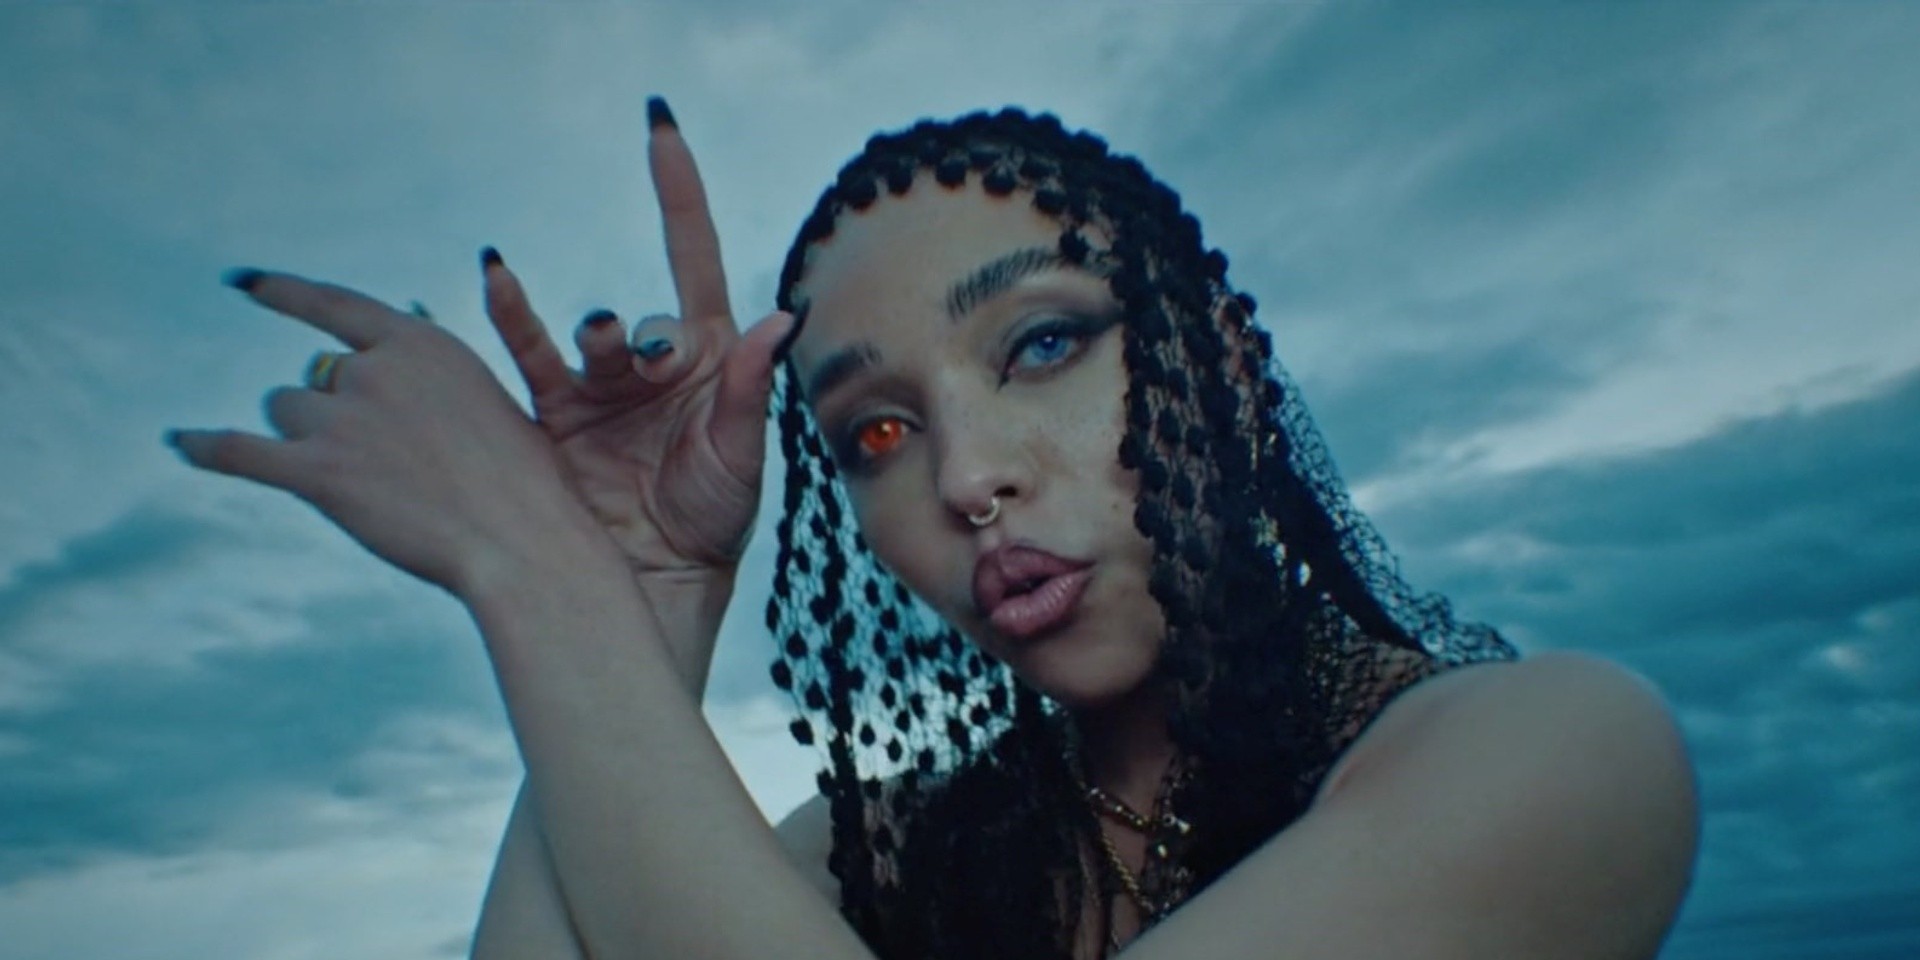 FKA twigs details new album MAGDALENE, shares cover art and new song with Future